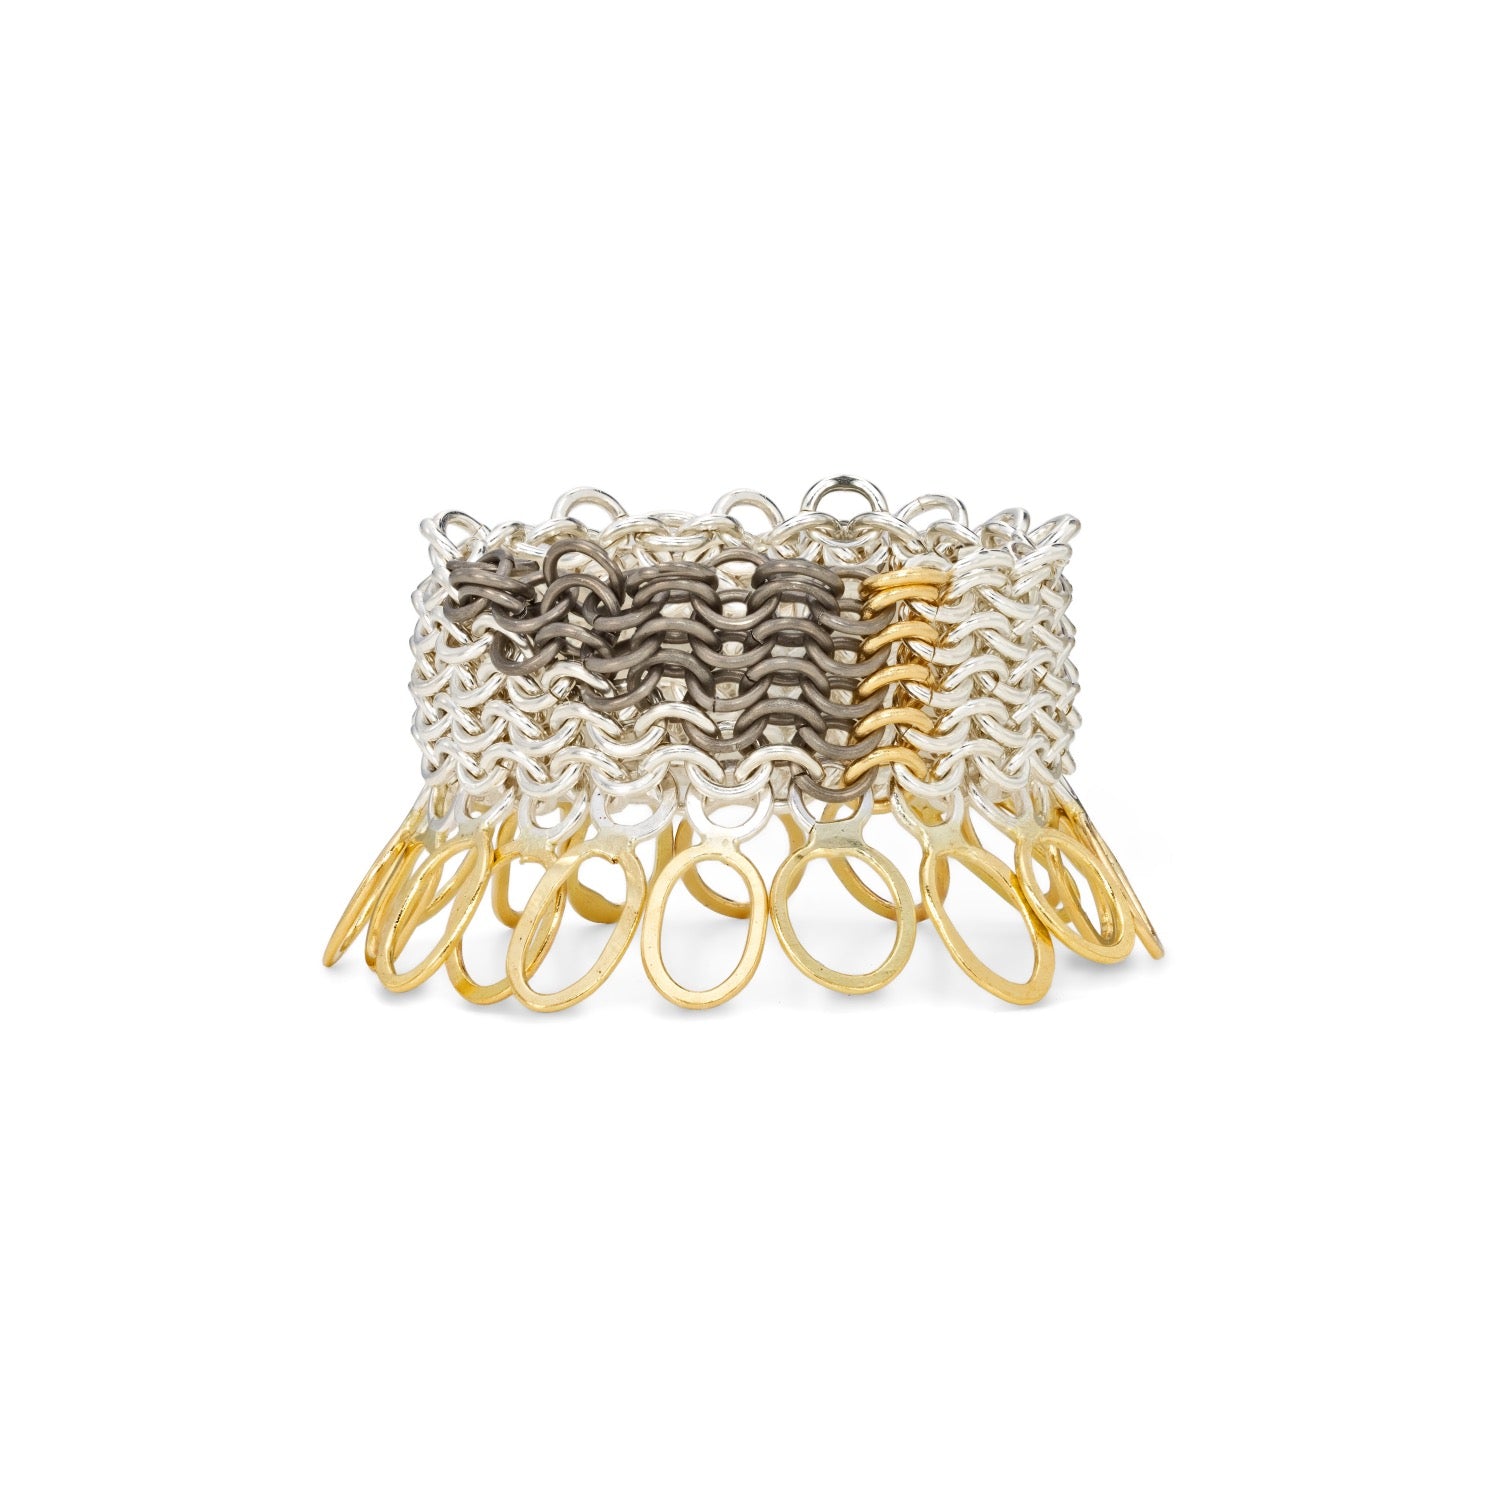 Wild Grasses Collection, handcrafted chainmail in recycled silver, 18ct yellow gold and titanium by Corrinne Eira Evans chainmail ring